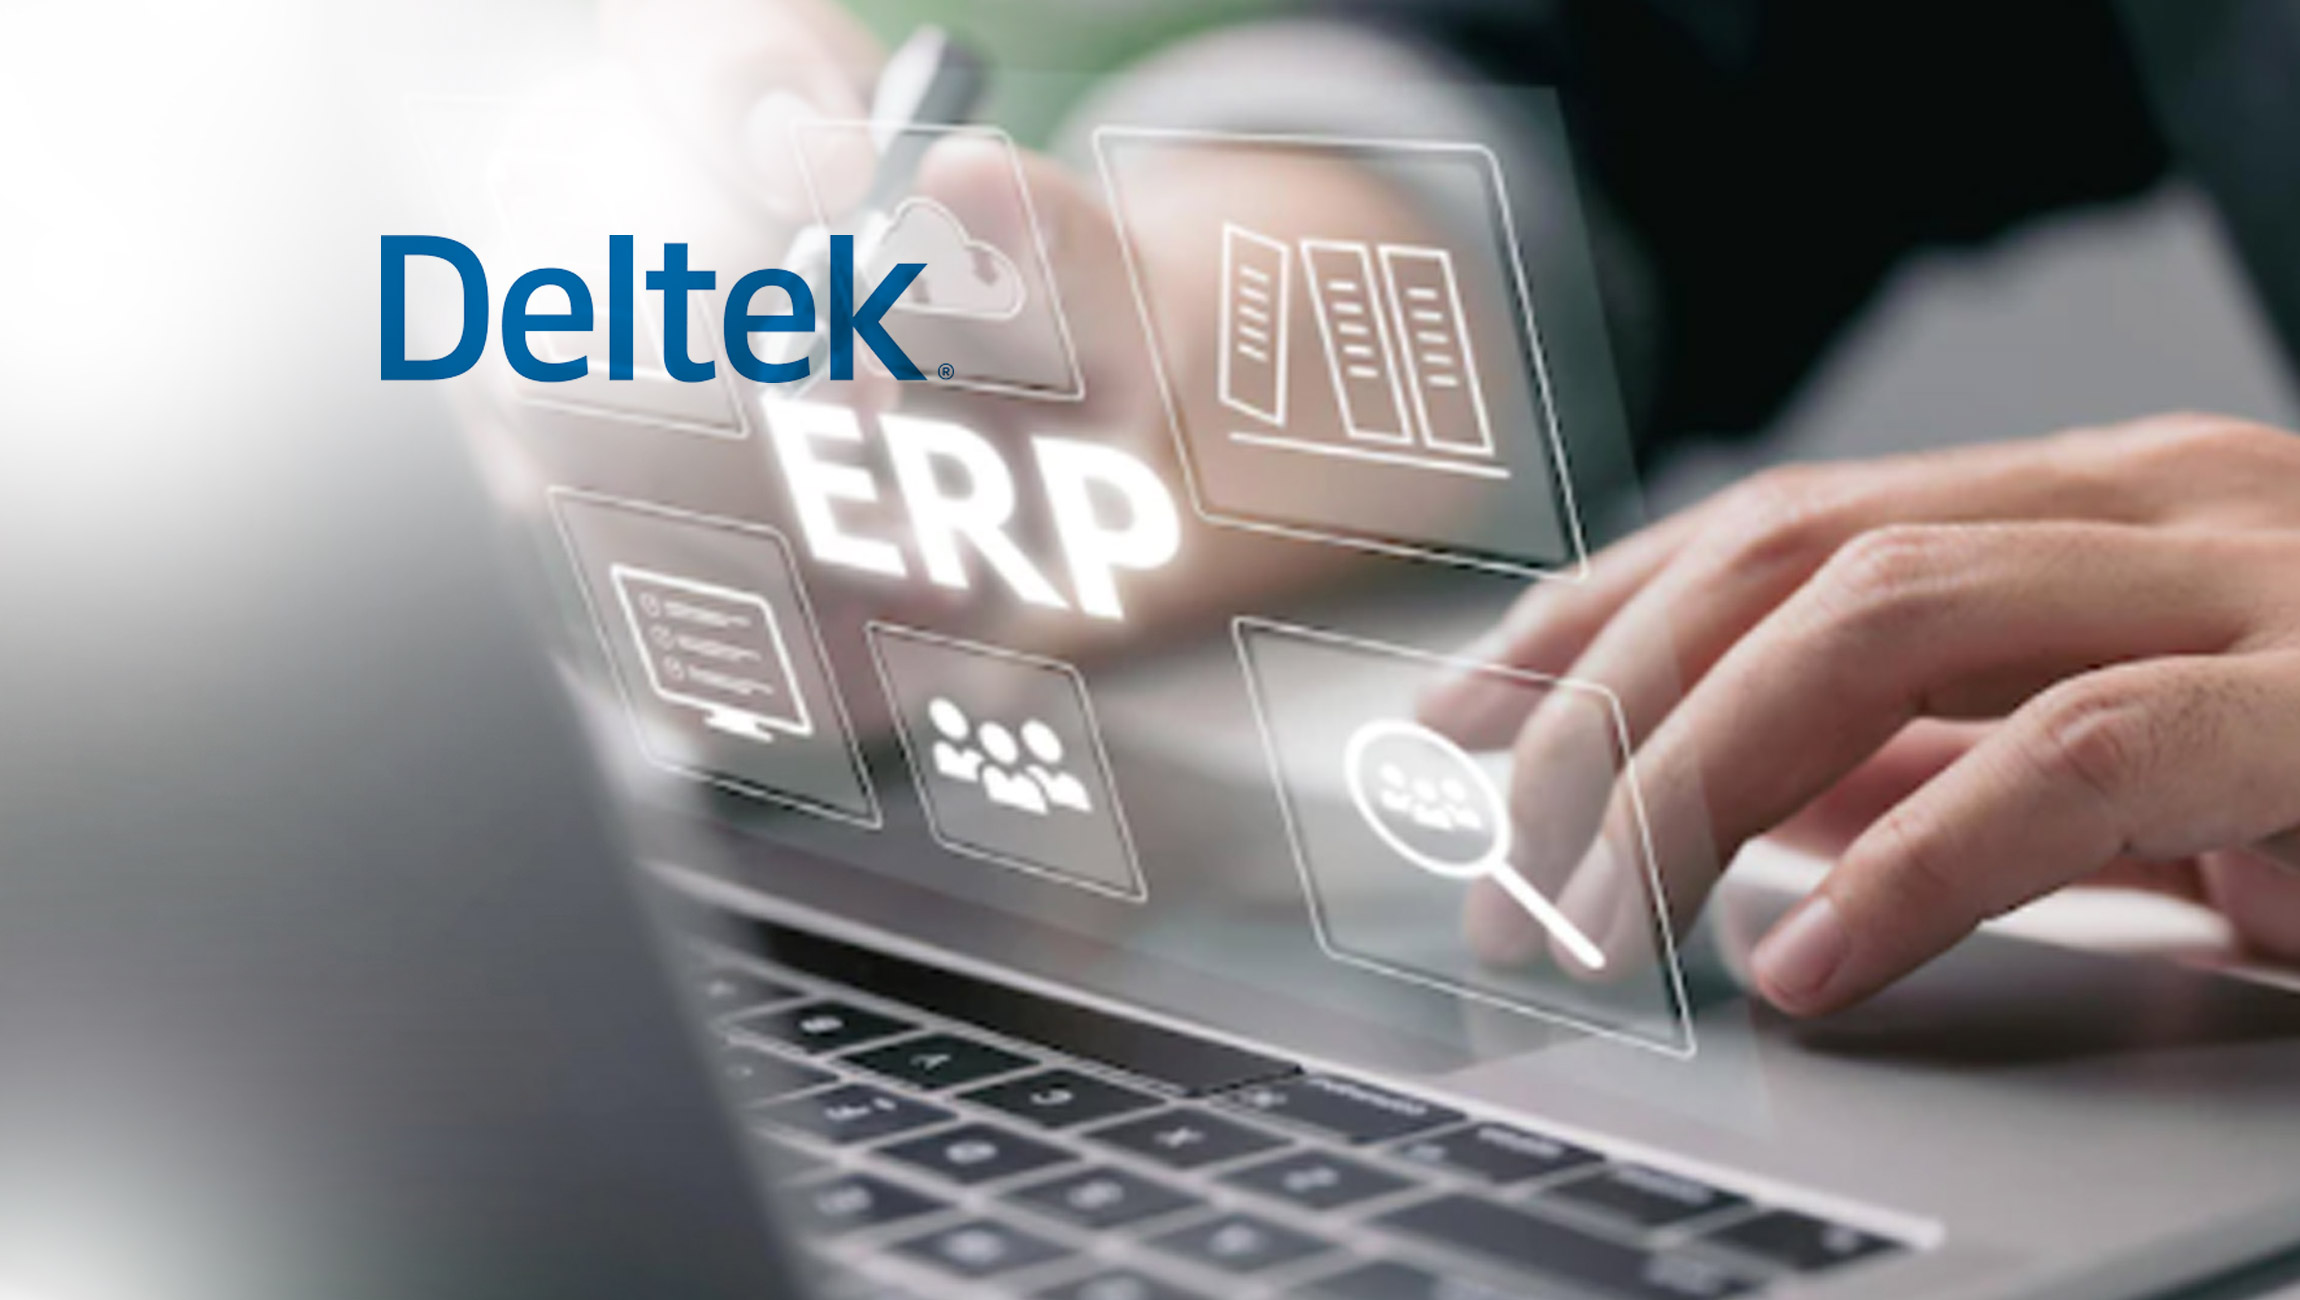 Deltek Reaches Agreement to Acquire TIP Technologies